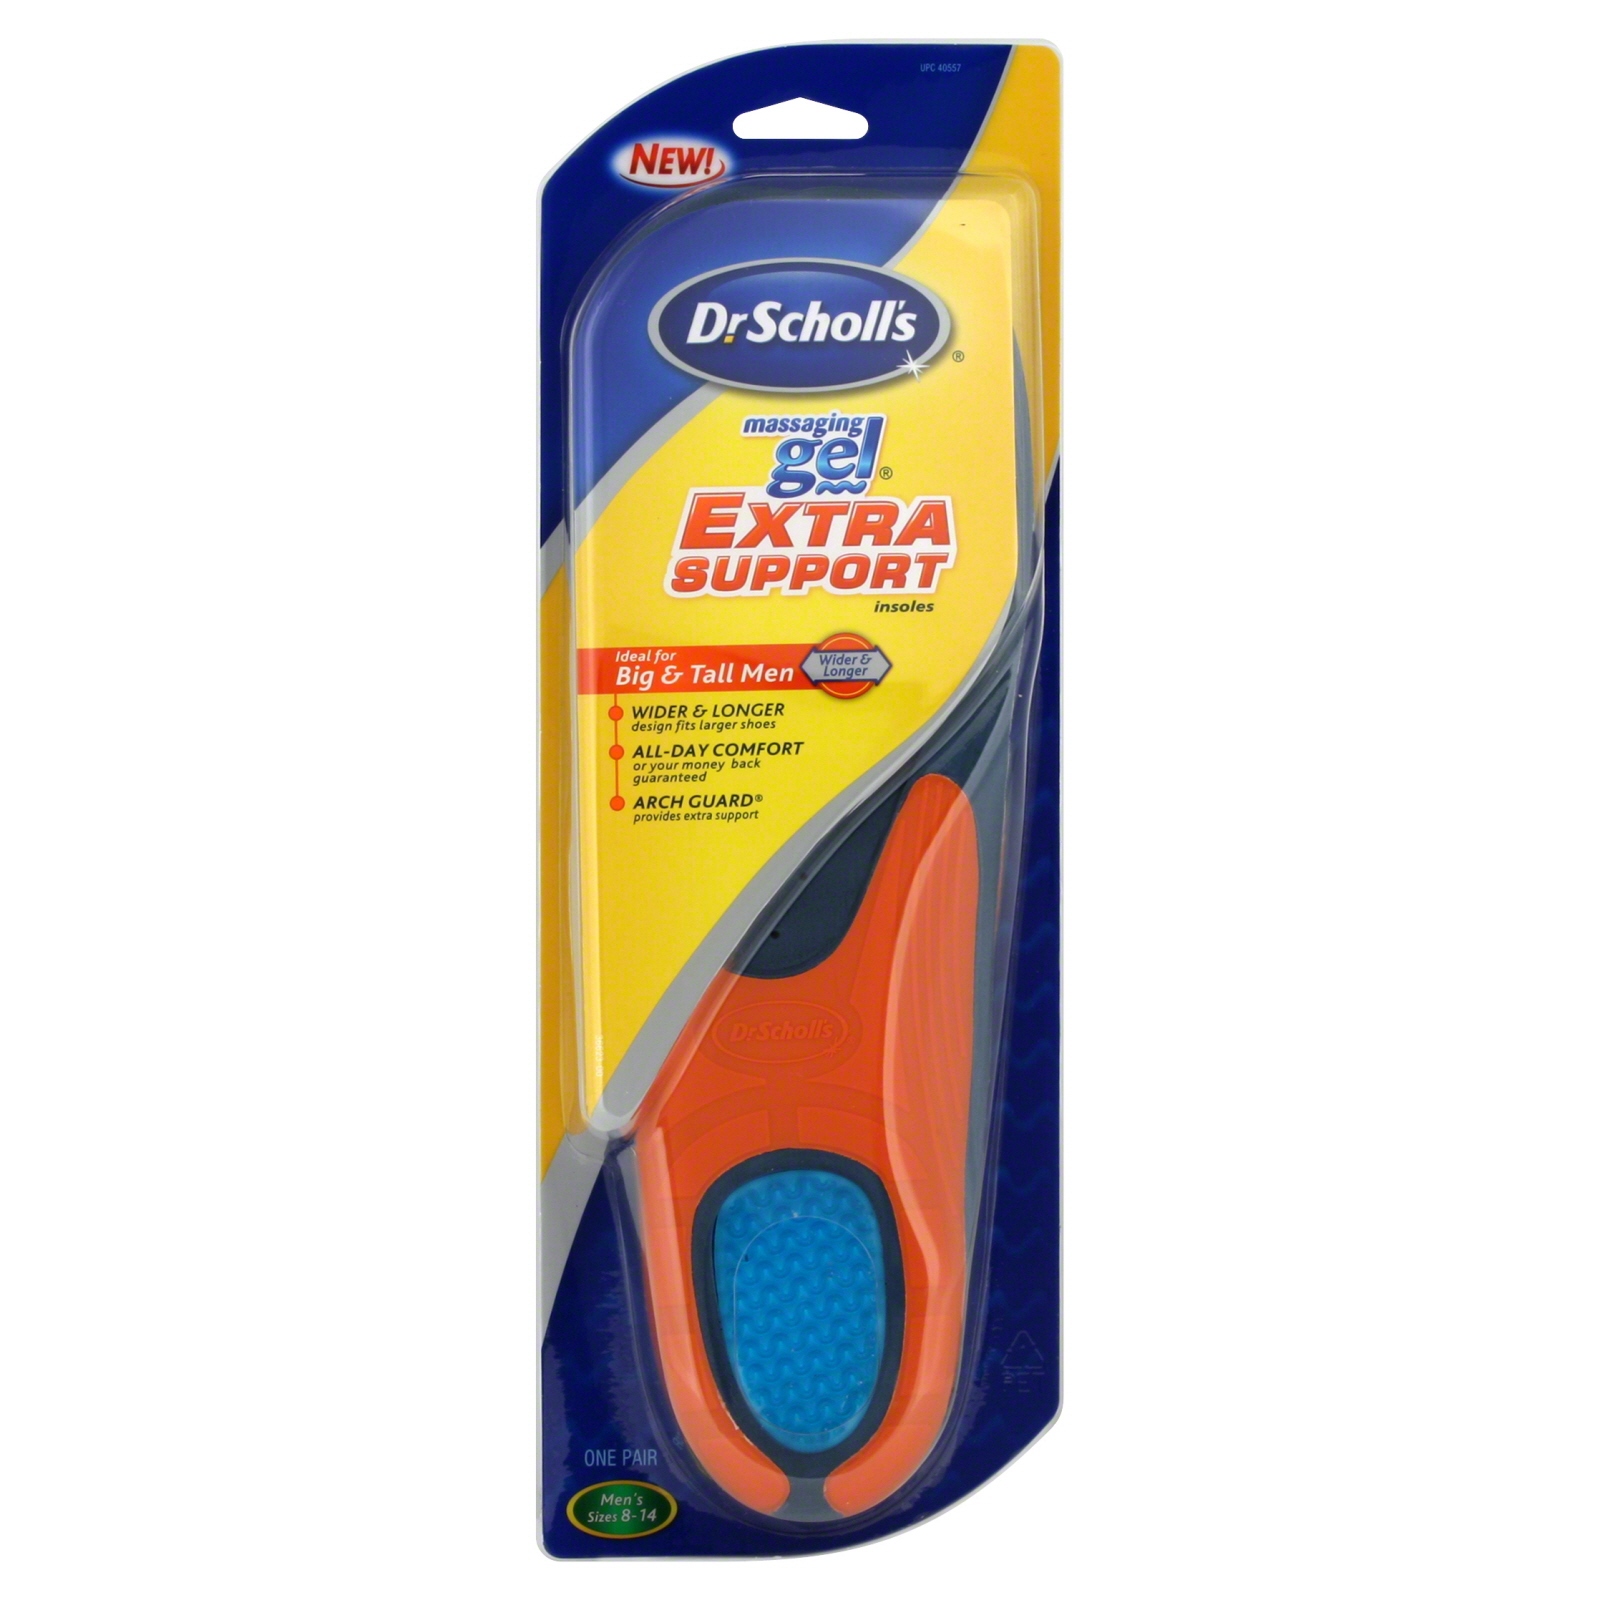 Dr. Scholl's Massaging Gel Insoles, Extra Support, Men's Sizes 8-14, 1 pair